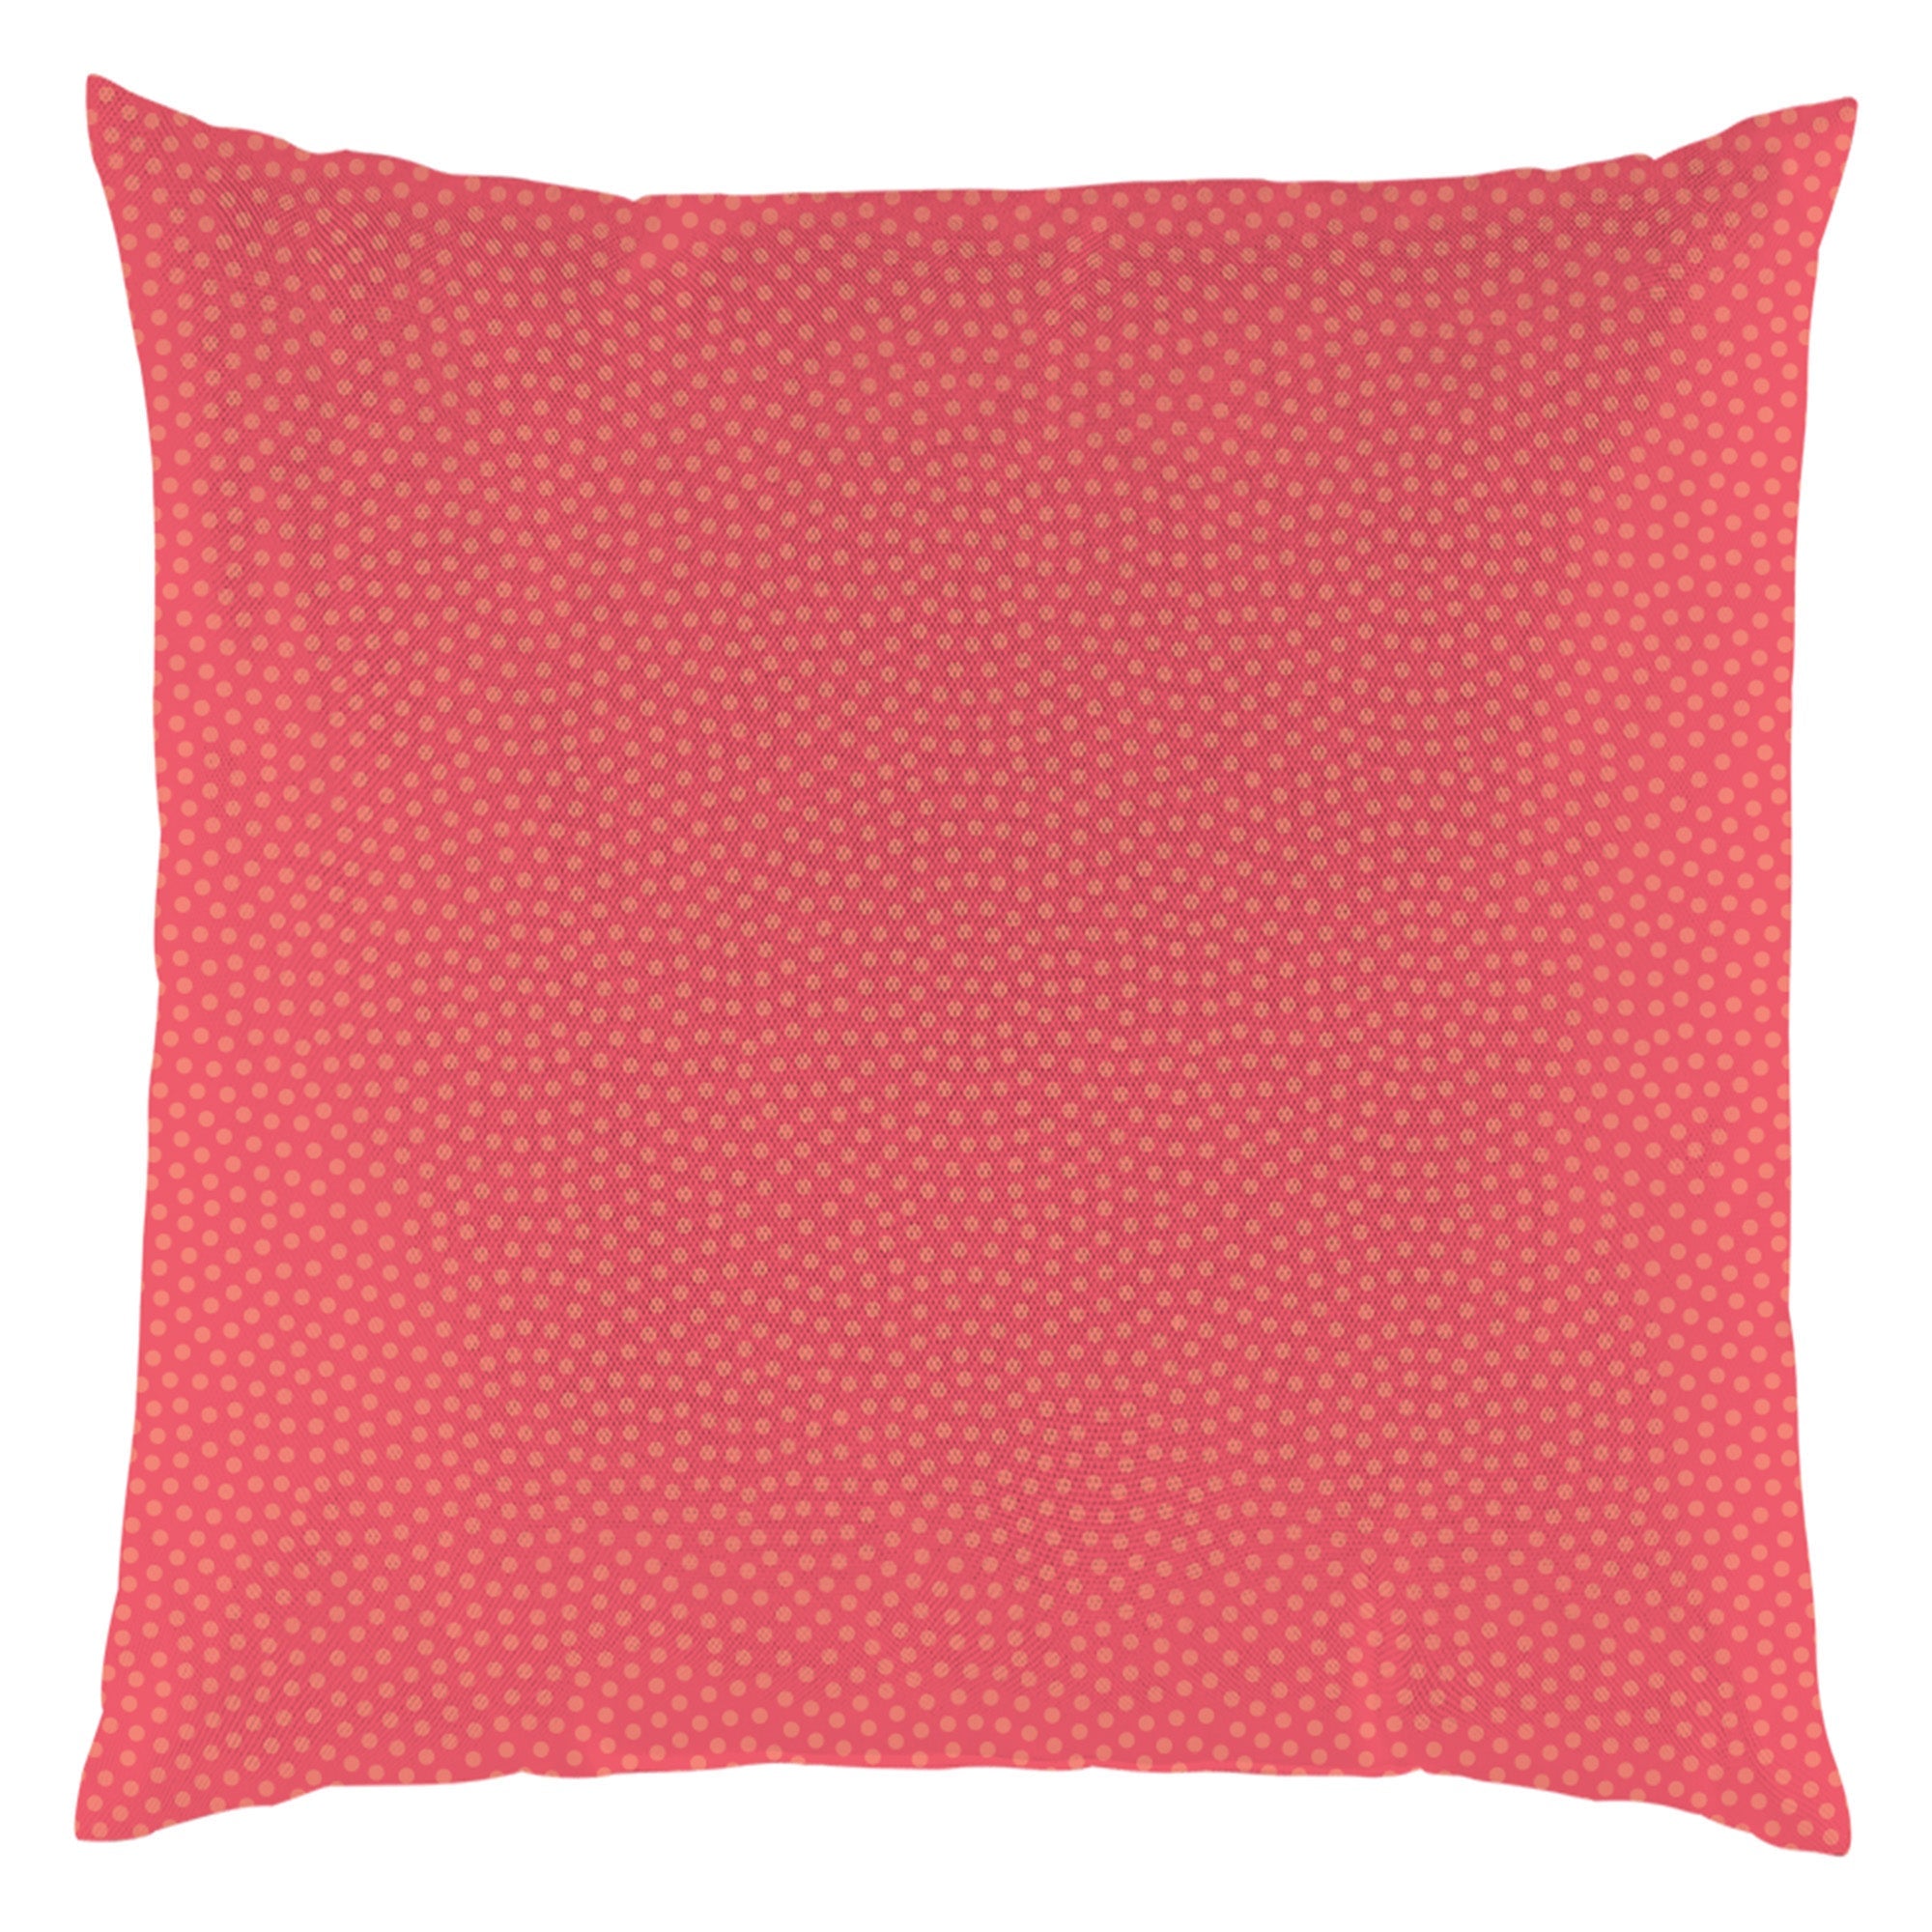 Printed Outdoor Cushion Pink 100% Polyester 17.7x17.7in  45x45cm